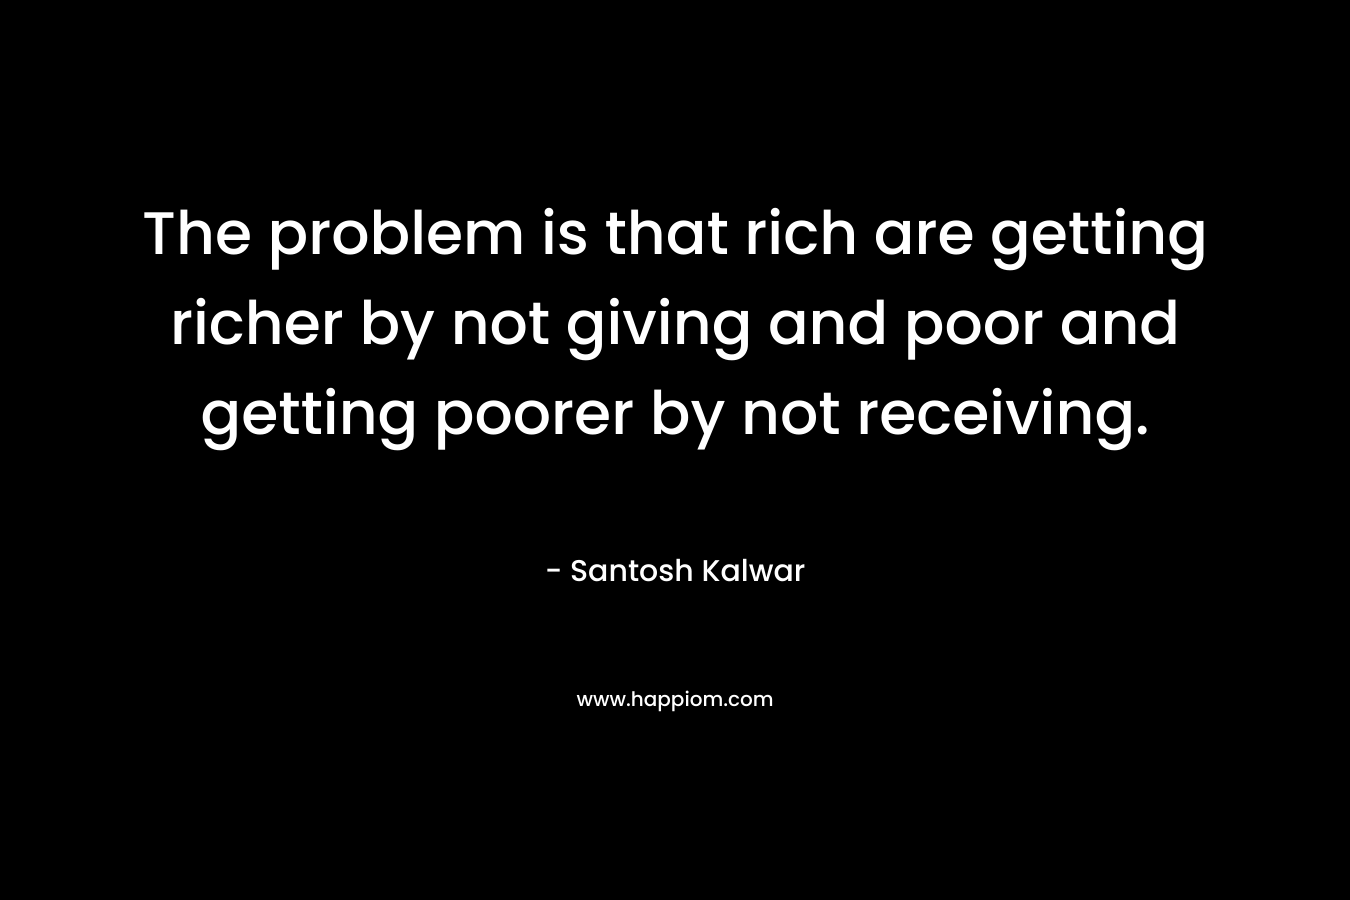 The problem is that rich are getting richer by not giving and poor and getting poorer by not receiving.